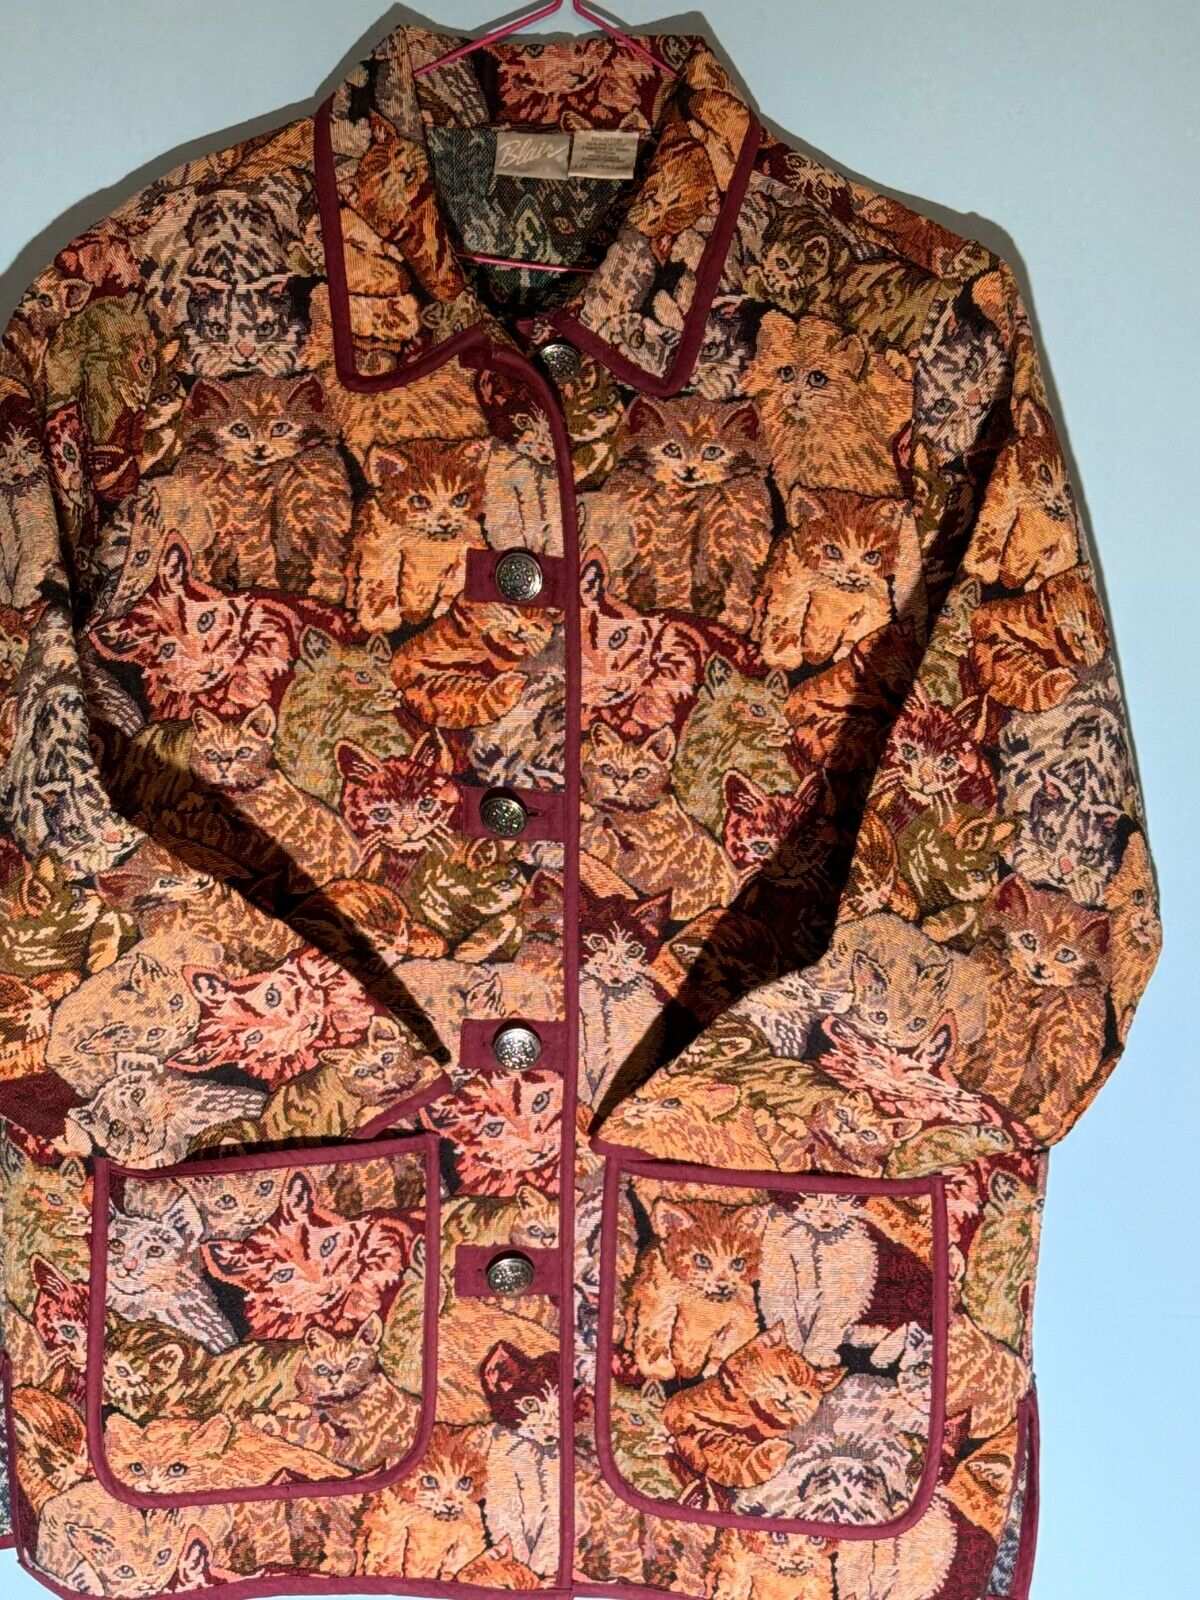 Vintage Blair Crazy for Cats Kawaii LUX Tapestry Jacket (Large)